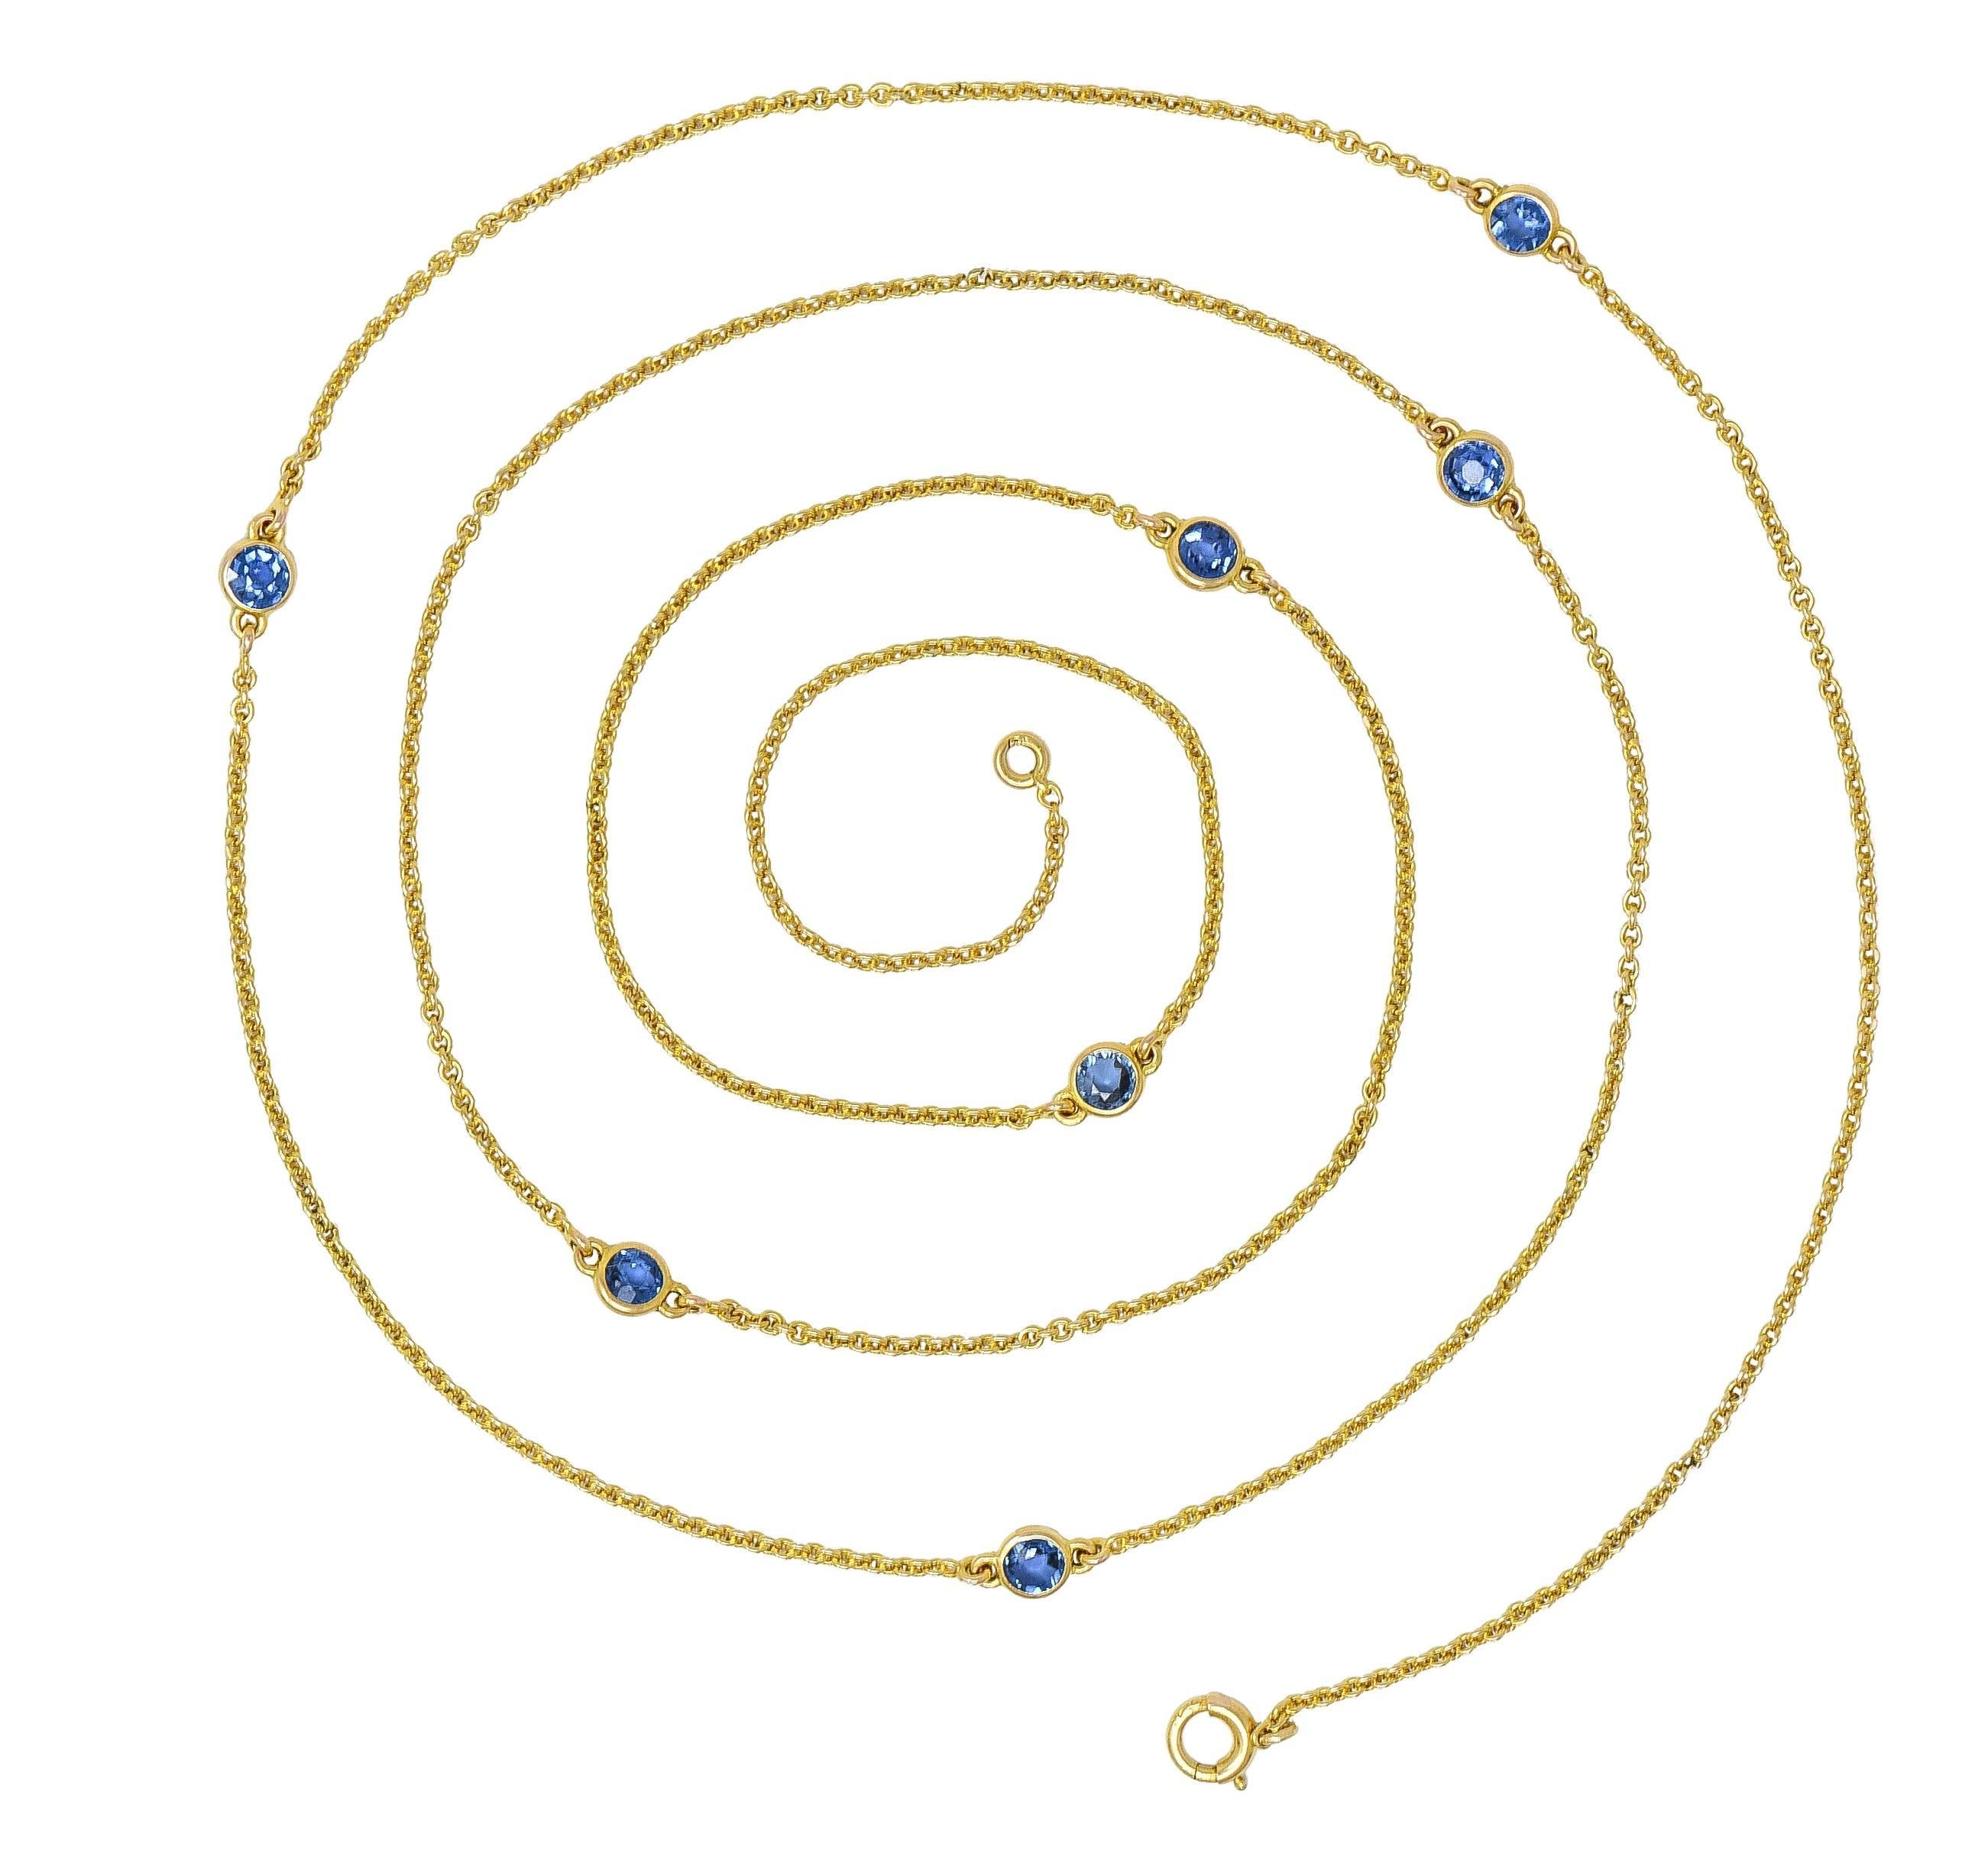 Designed as a 1.5 mm cable link chain with seven sapphire stations
Round cut and weighing approximately 2.10 carats total 
Transparent medium blue in color - bezel set 
Completed by spring clasp closure
Stamped for 14 karat gold 
Circa: 1890
Width